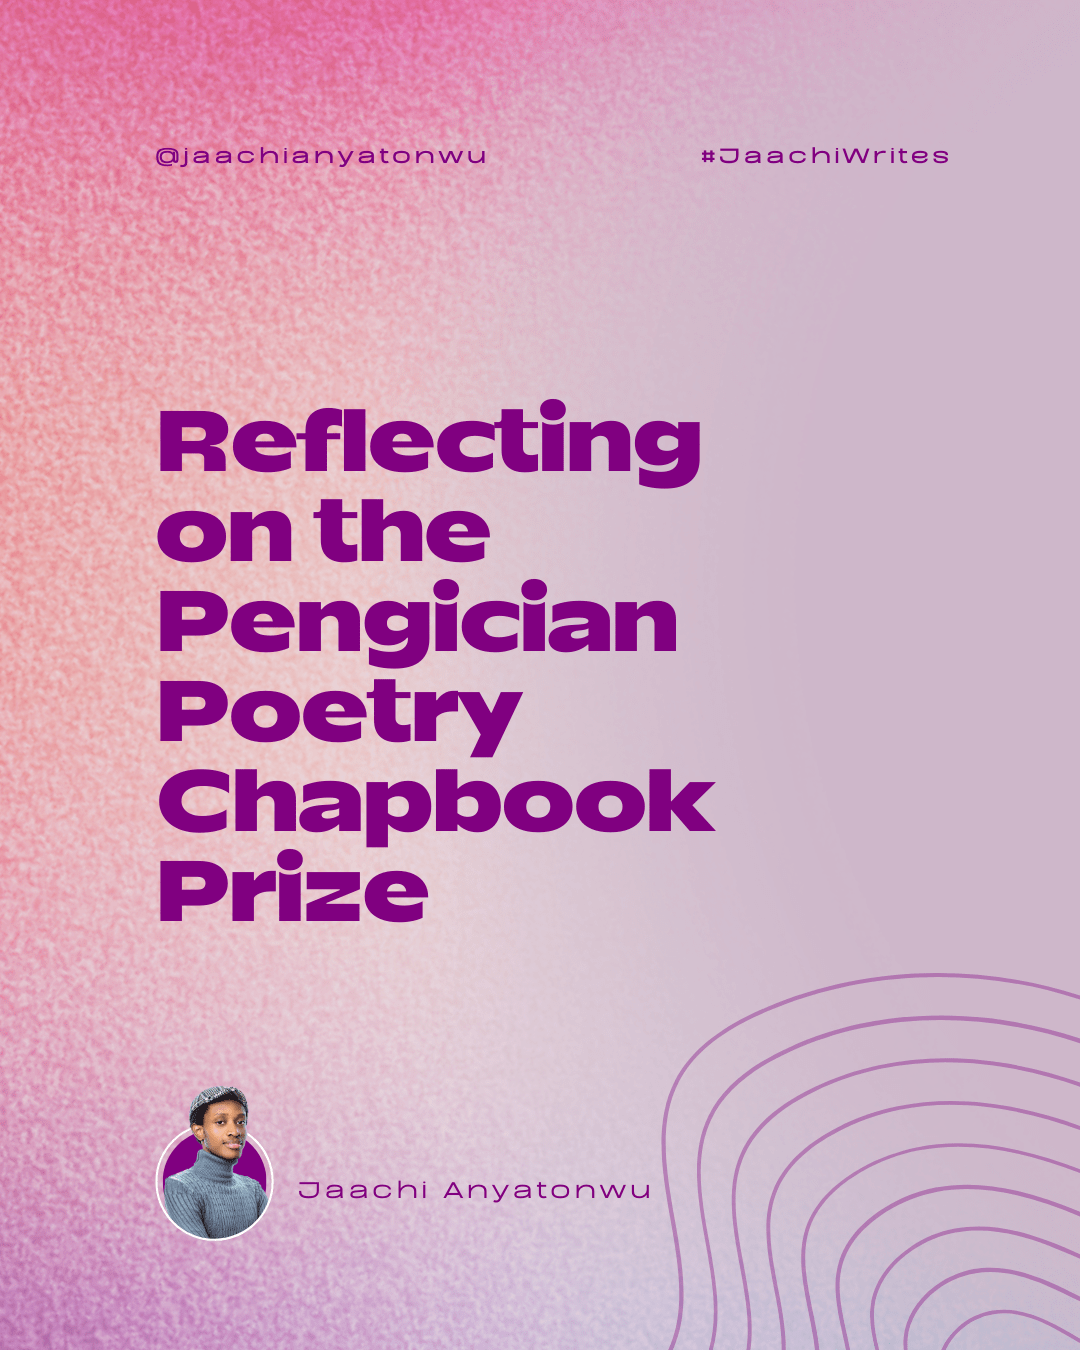 Reflecting on the Pengician Poetry Chapbook Prize